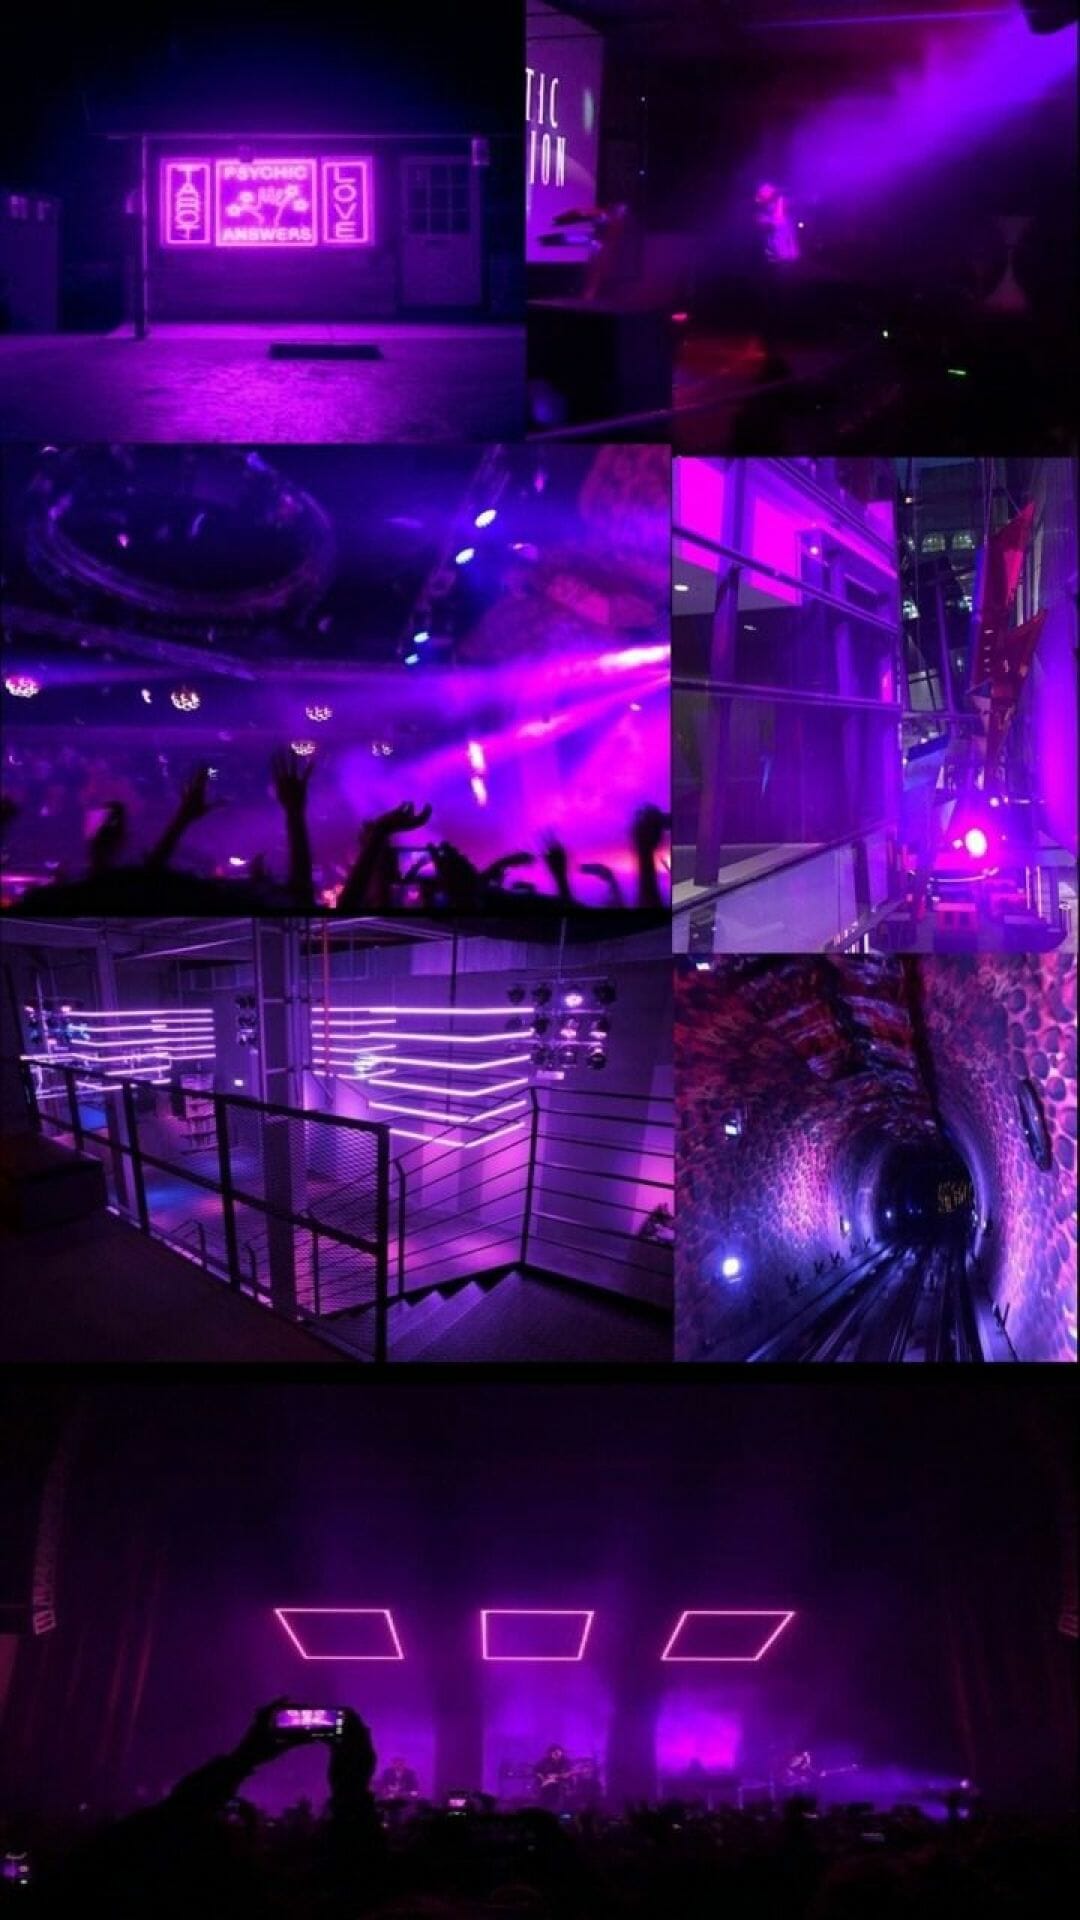 A collage of pictures with purple lighting - Neon